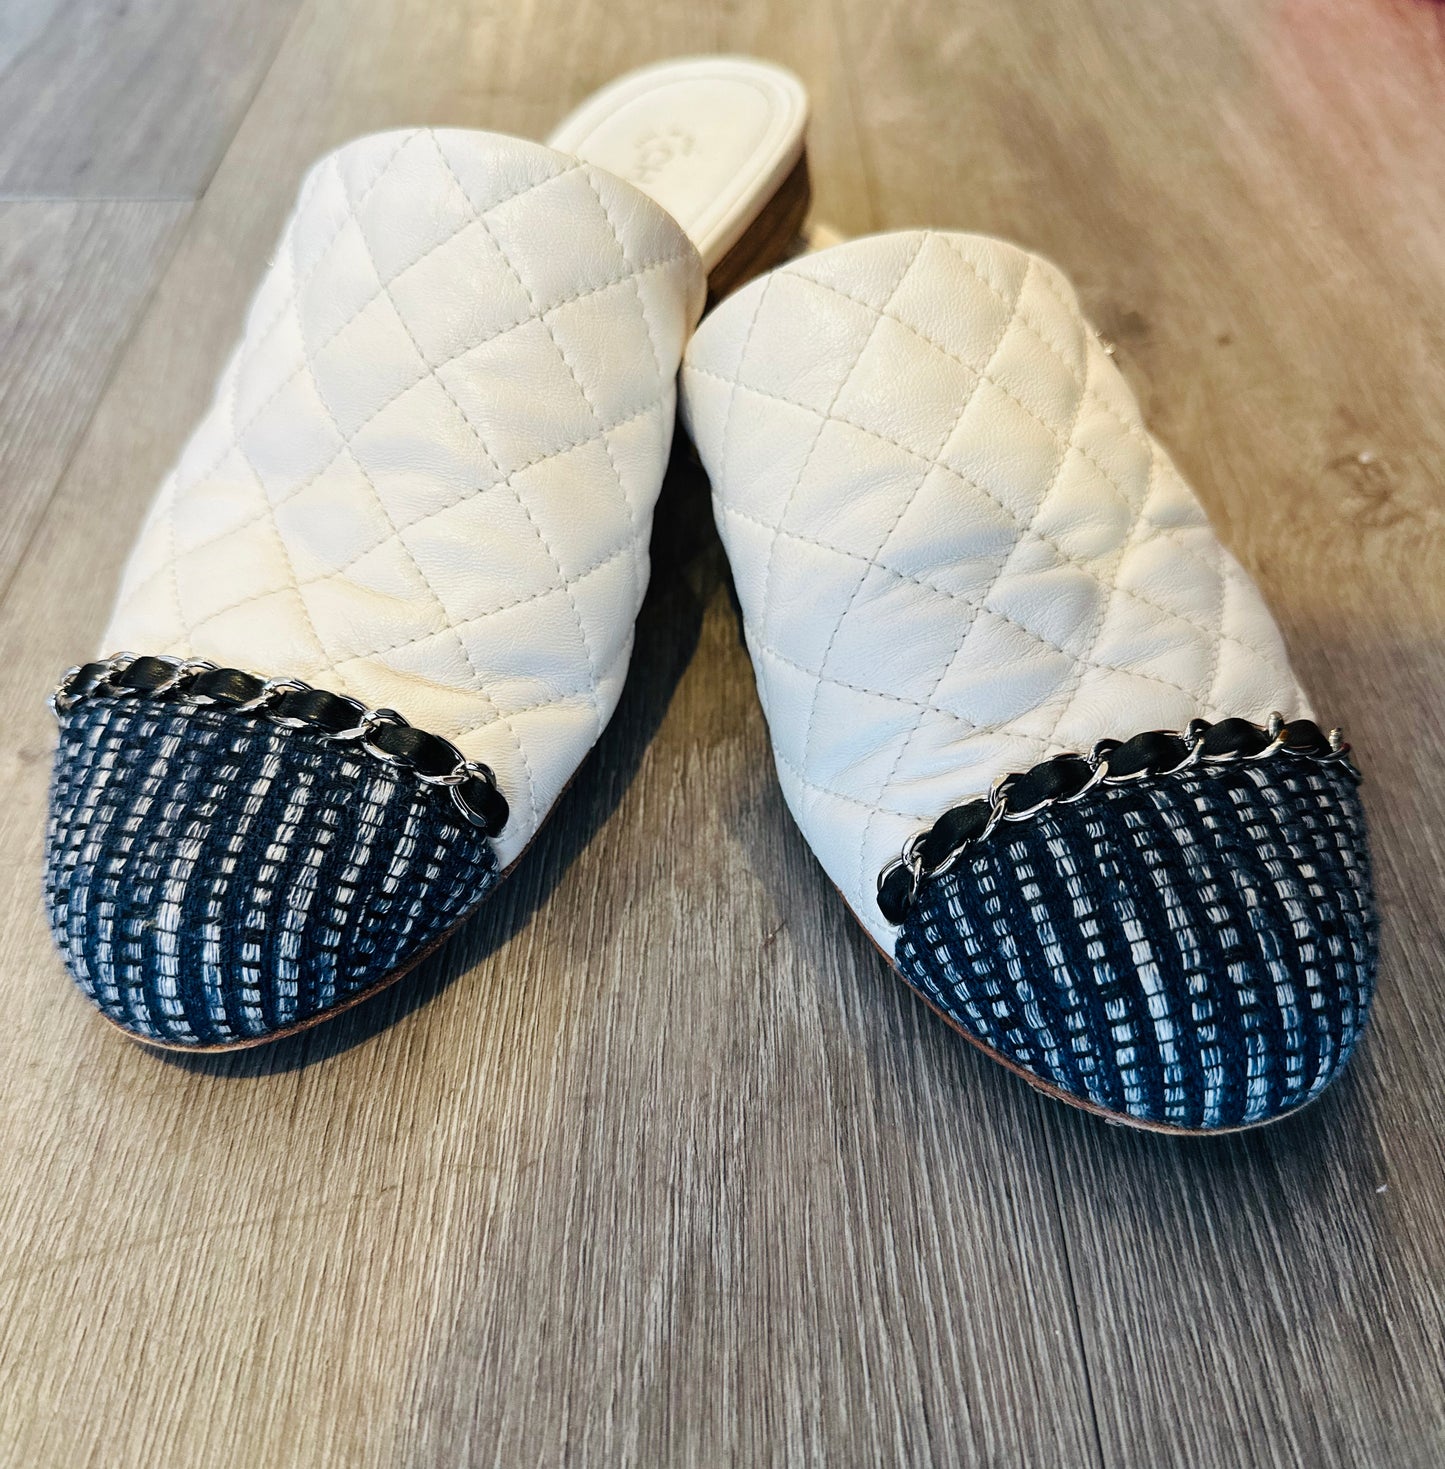 Chanel Quilted Leather And Grosgrain Fabric Mules - Size 38